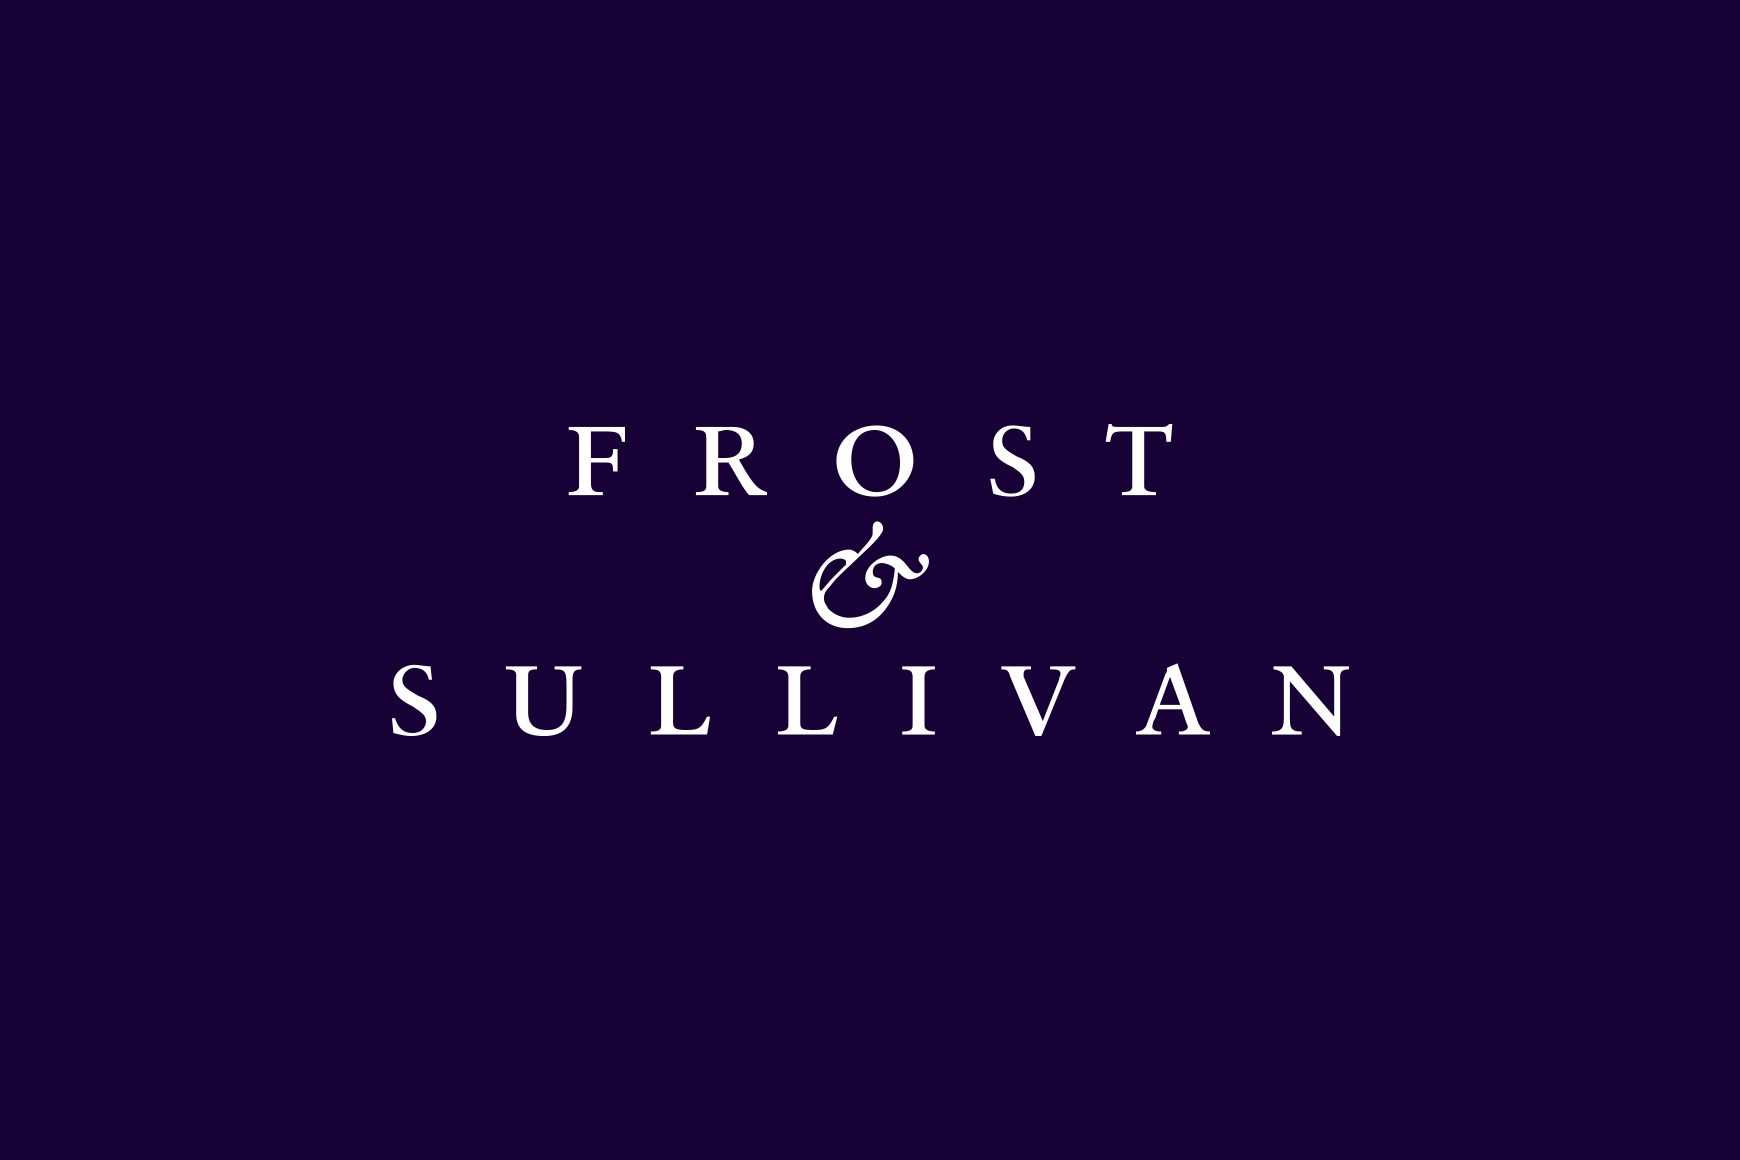 Talkdesk recognized by Frost & Sullivan as the Fastest-Growing Provider in the Cloud Contact Center Software Market